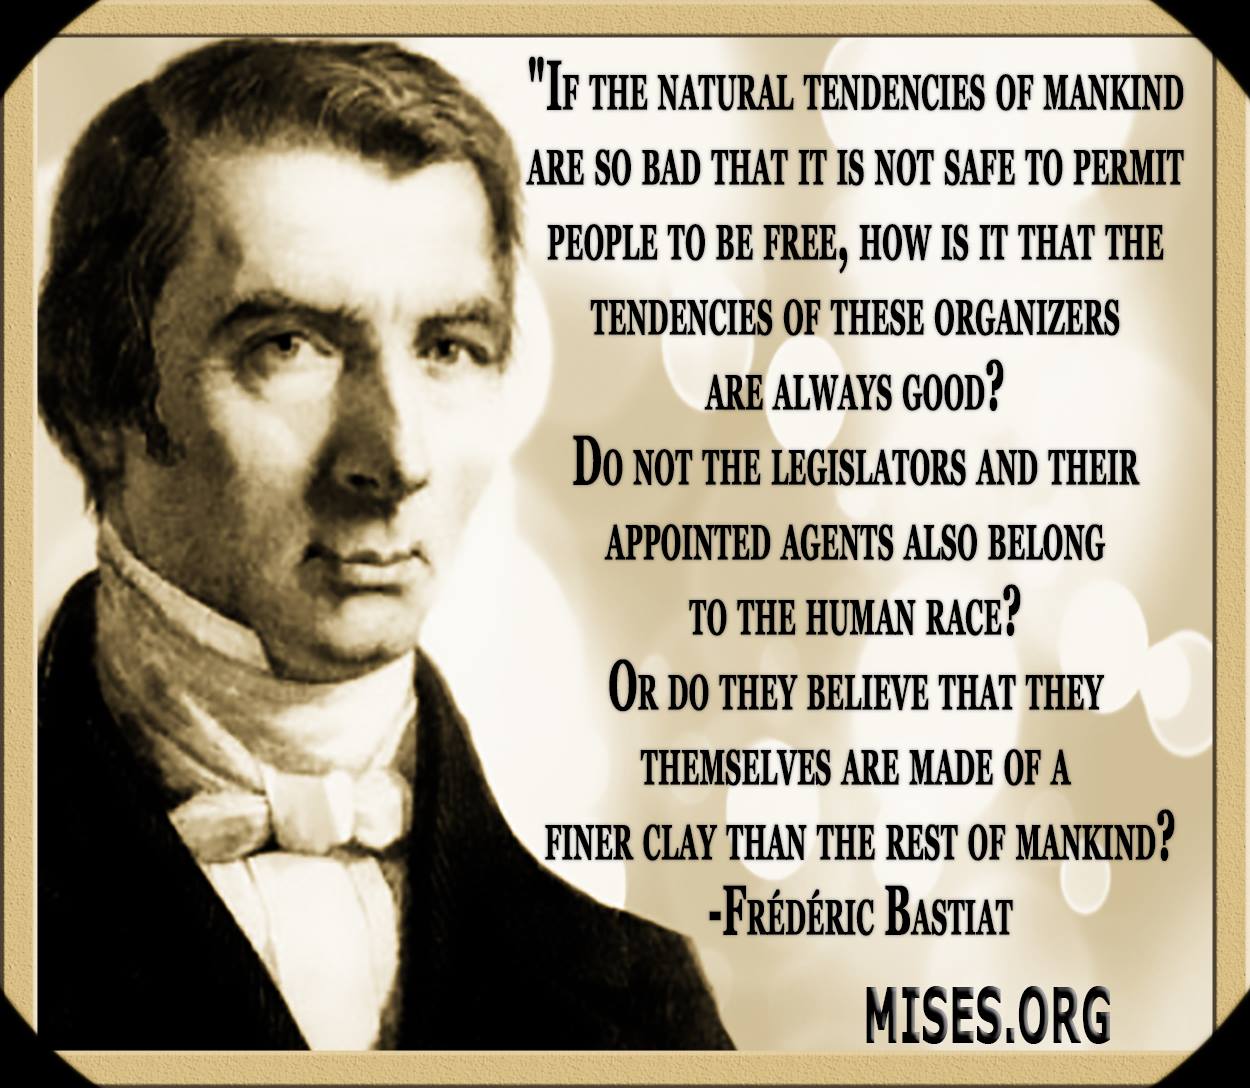 Bastiat on Leftist belief in its leaders' goodness